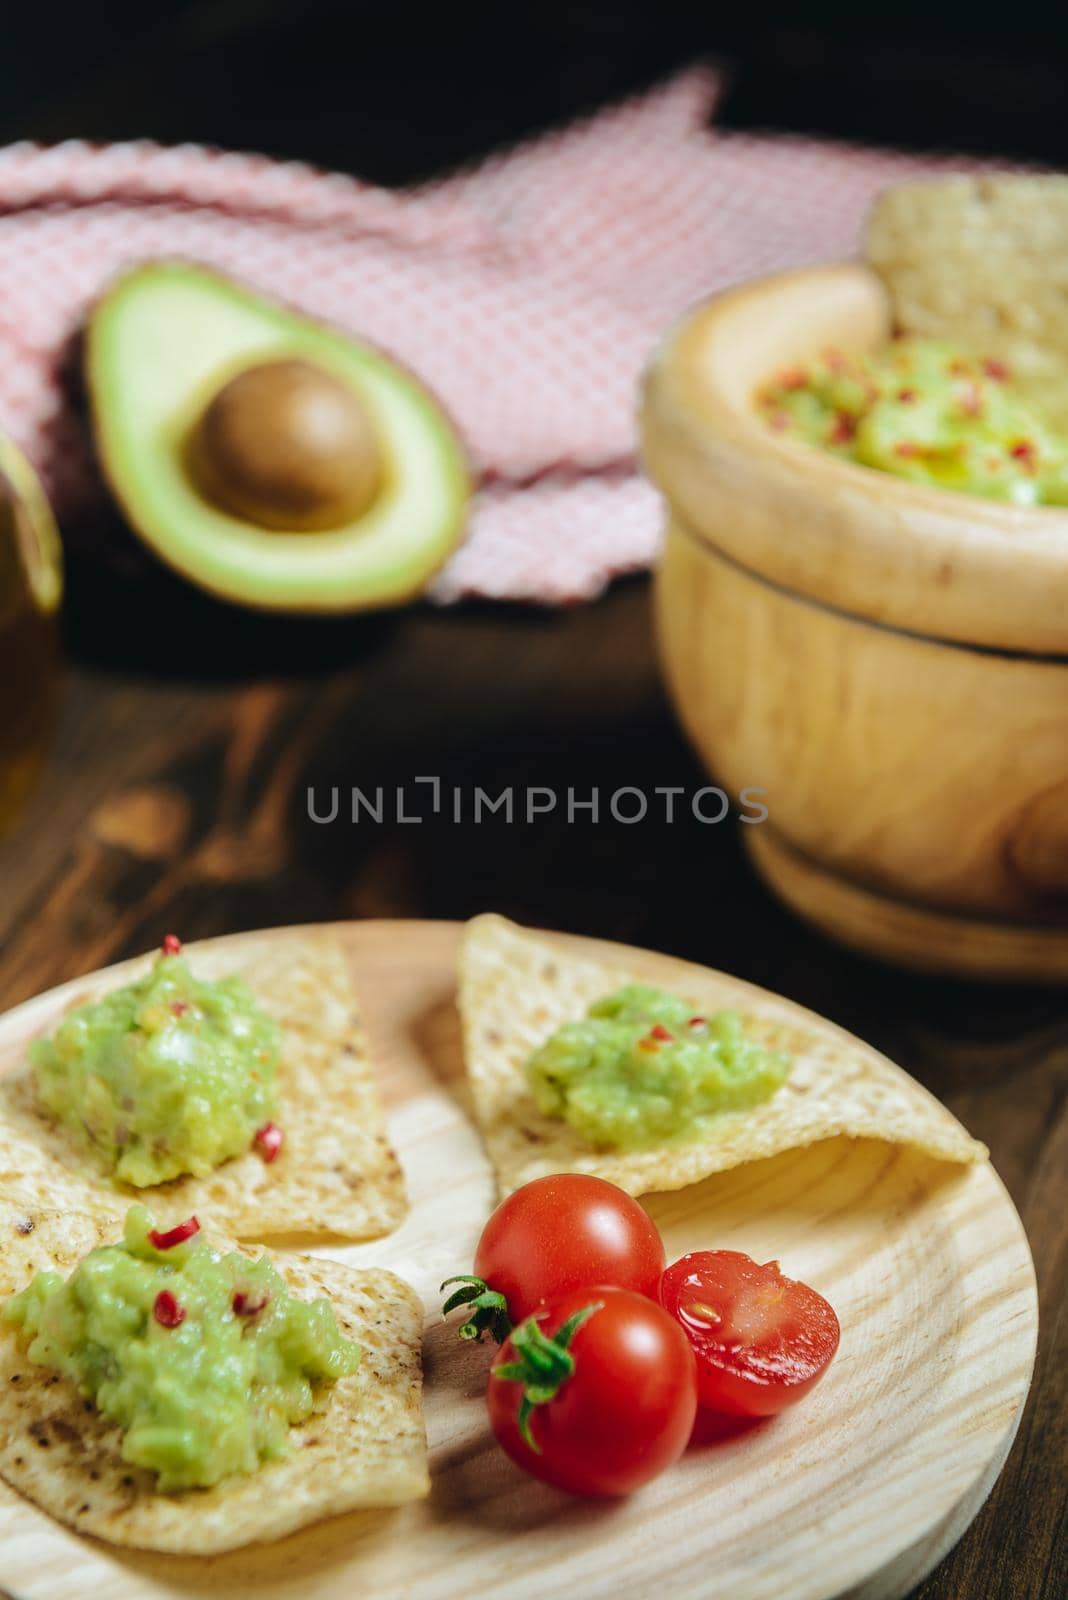 vertical photo of fresh guacamole in a wood bowl with nachos next to an avocado and a kitchen rag, typical mexican healthy vegan cuisine with rustic dark food photo style